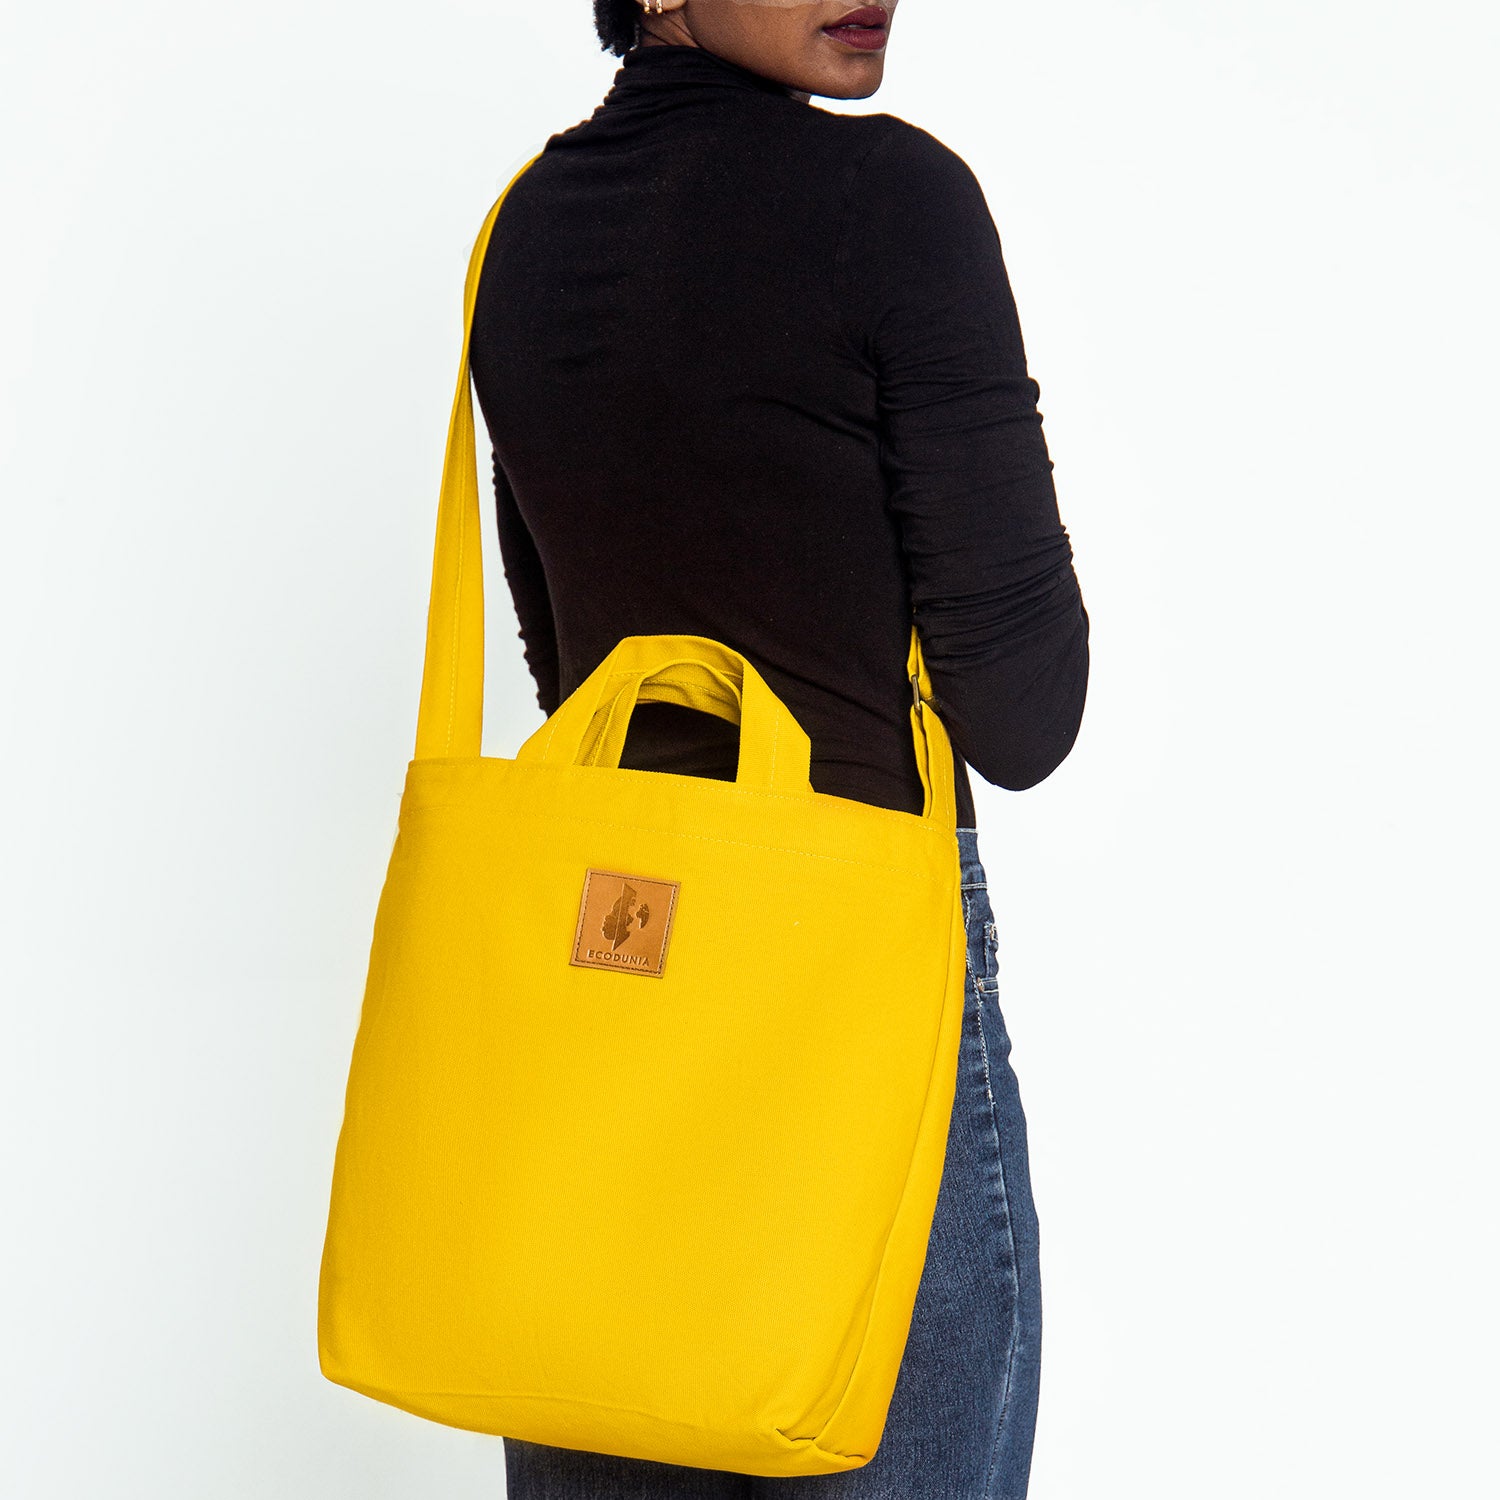 The Amani Carry All Bag - Yellow